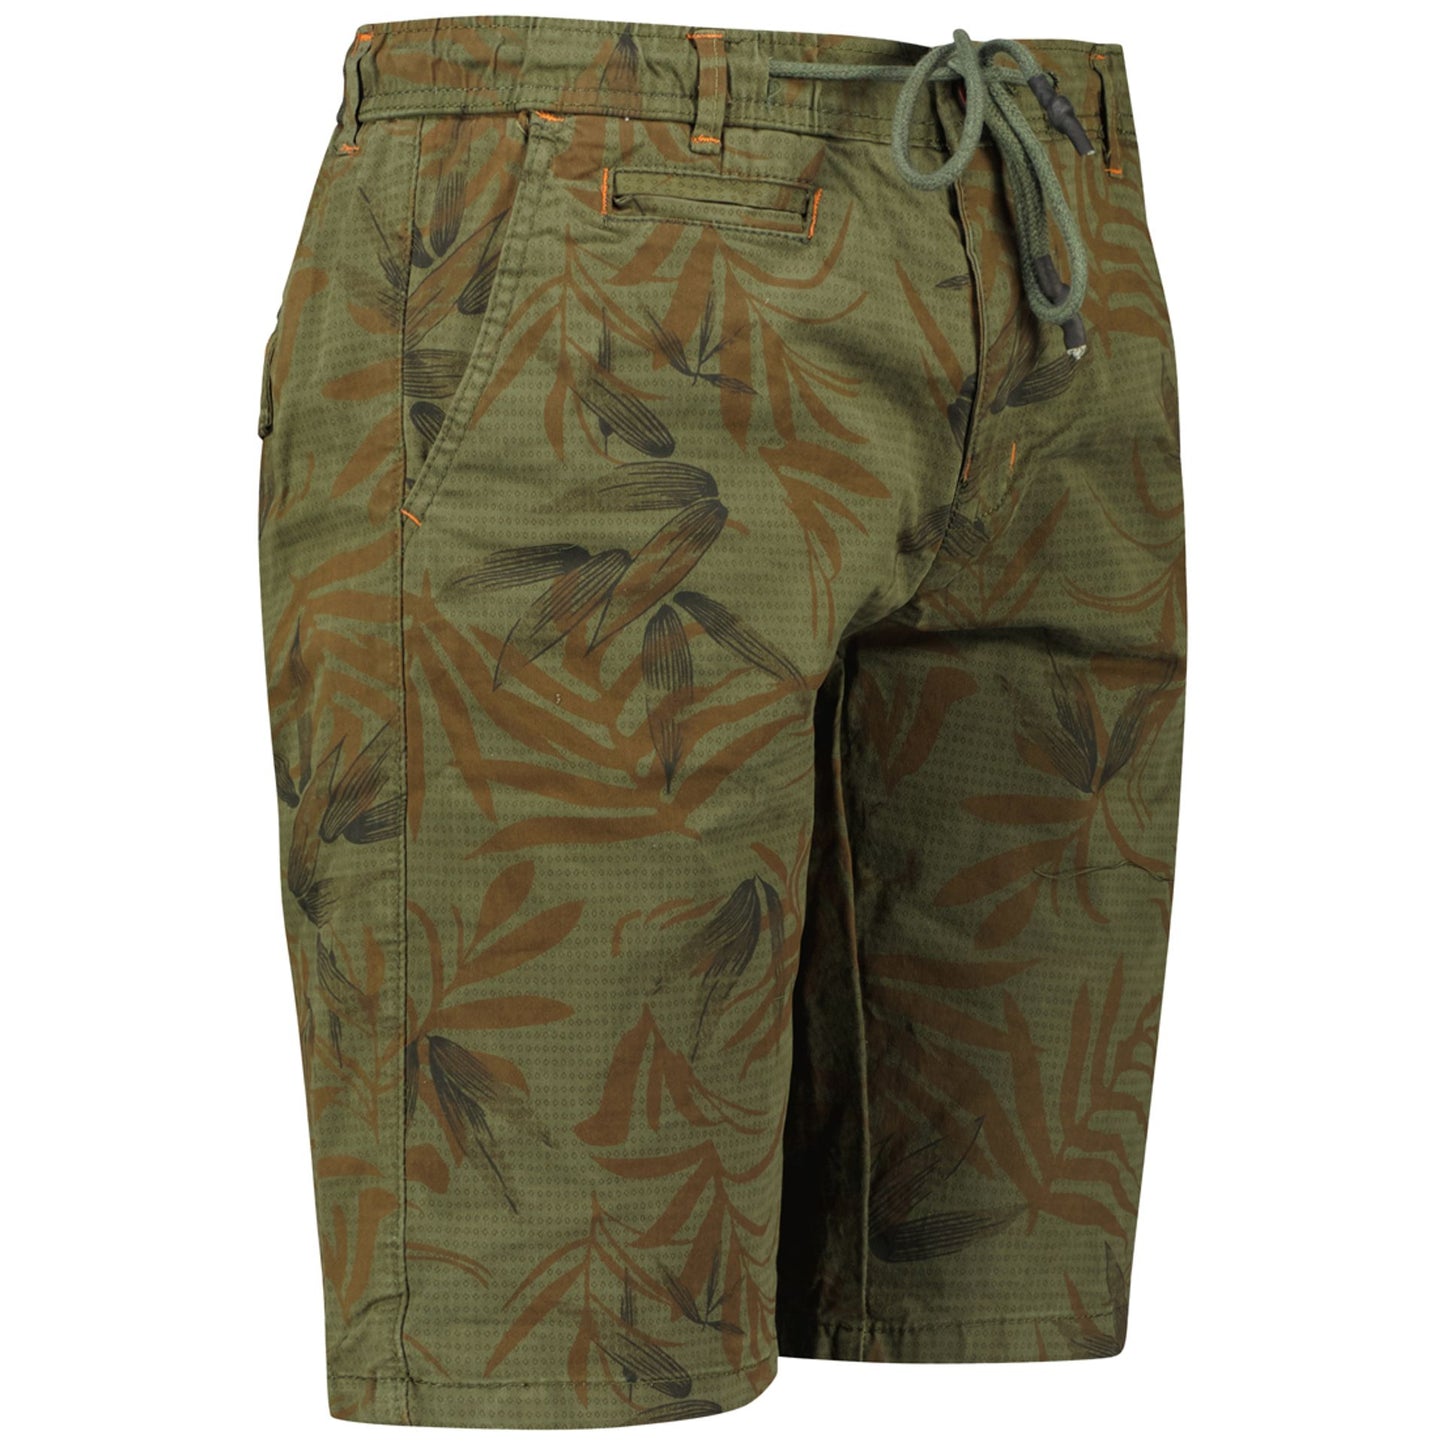 Geographical Norway Shorts 